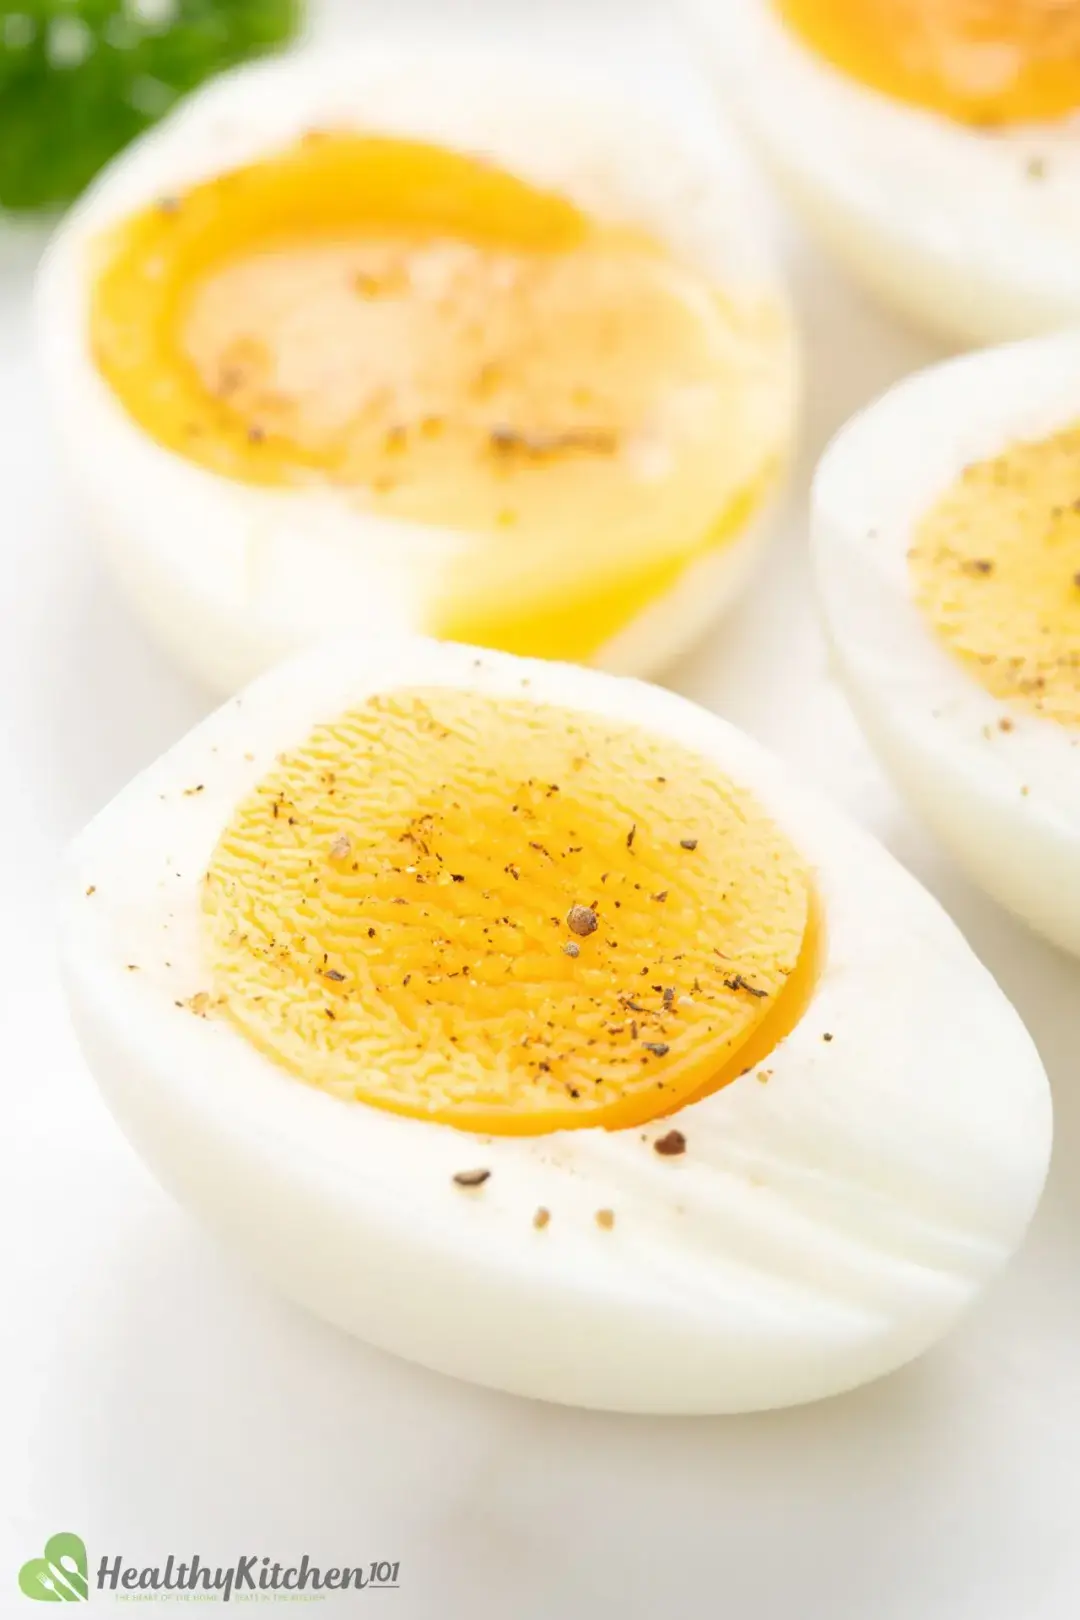 Eggs Nutrition Facts